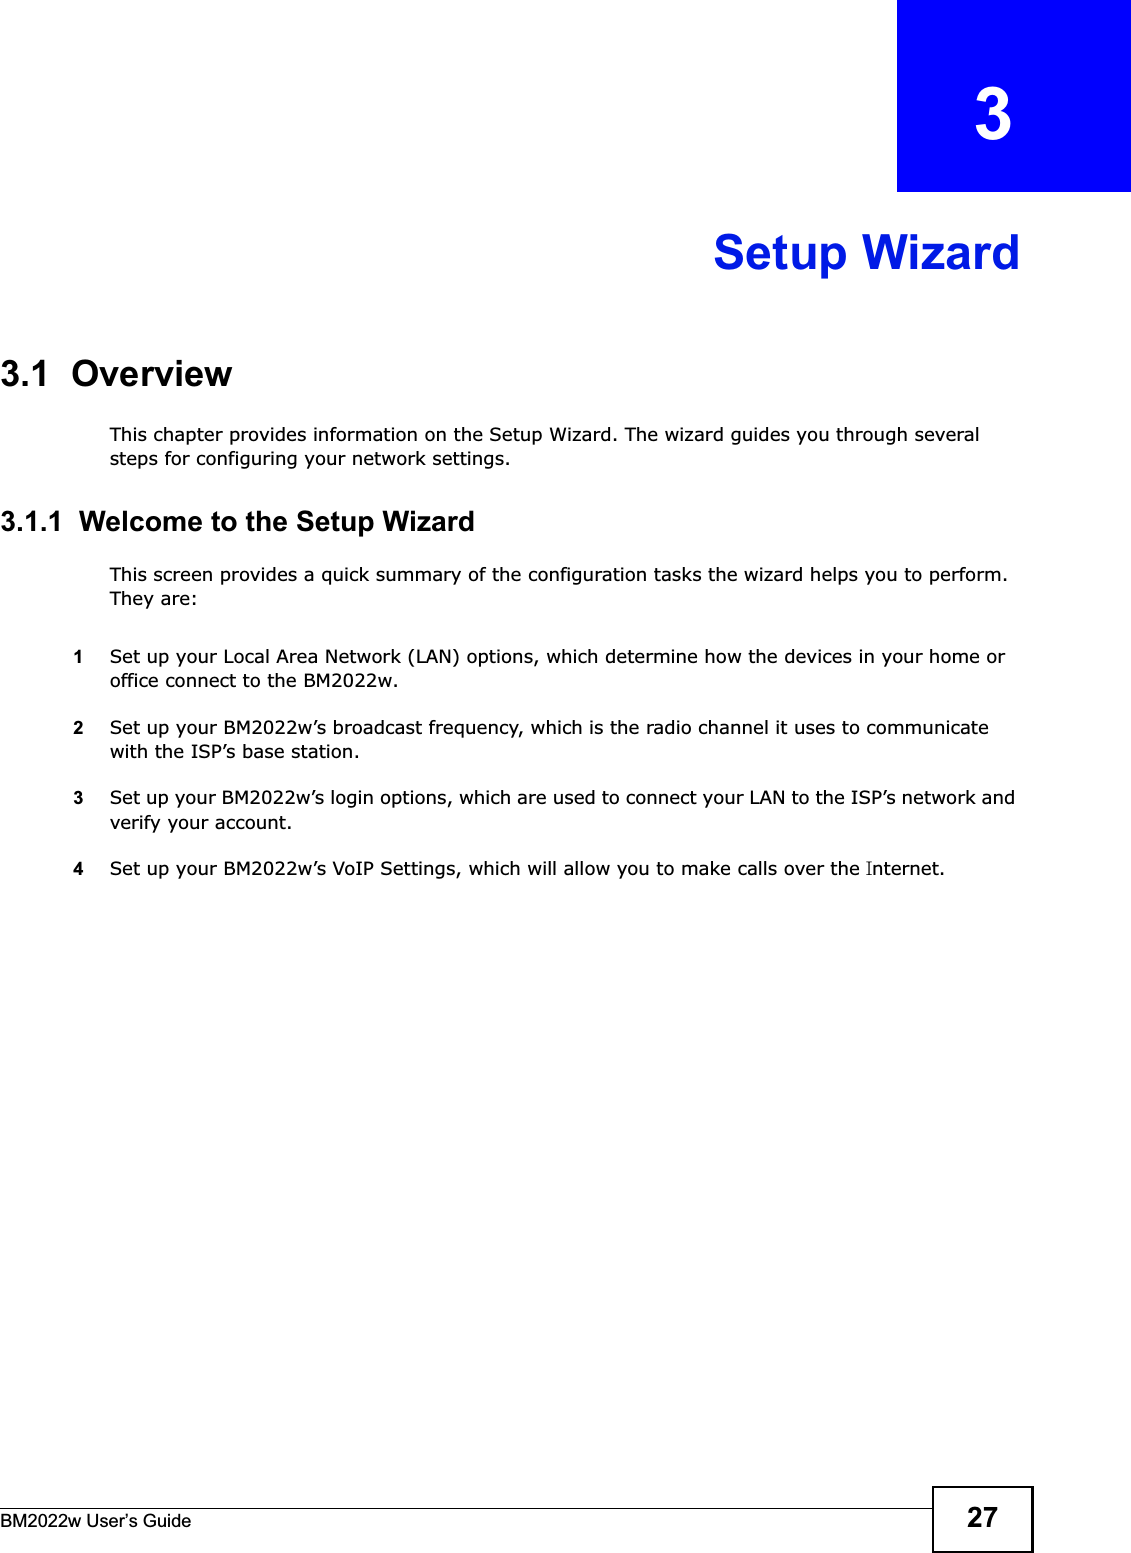 BM2022w User’s Guide 27CHAPTER   3Setup Wizard3.1  OverviewThis chapter provides information on the Setup Wizard. The wizard guides you through several steps for configuring your network settings.3.1.1  Welcome to the Setup WizardThis screen provides a quick summary of the configuration tasks the wizard helps you to perform. They are:1Set up your Local Area Network (LAN) options, which determine how the devices in your home or office connect to the BM2022w.2Set up your BM2022w’s broadcast frequency, which is the radio channel it uses to communicate with the ISP’s base station.3Set up your BM2022w’s login options, which are used to connect your LAN to the ISP’s network and verify your account. 4Set up your BM2022w’s VoIP Settings, which will allow you to make calls over the Internet.